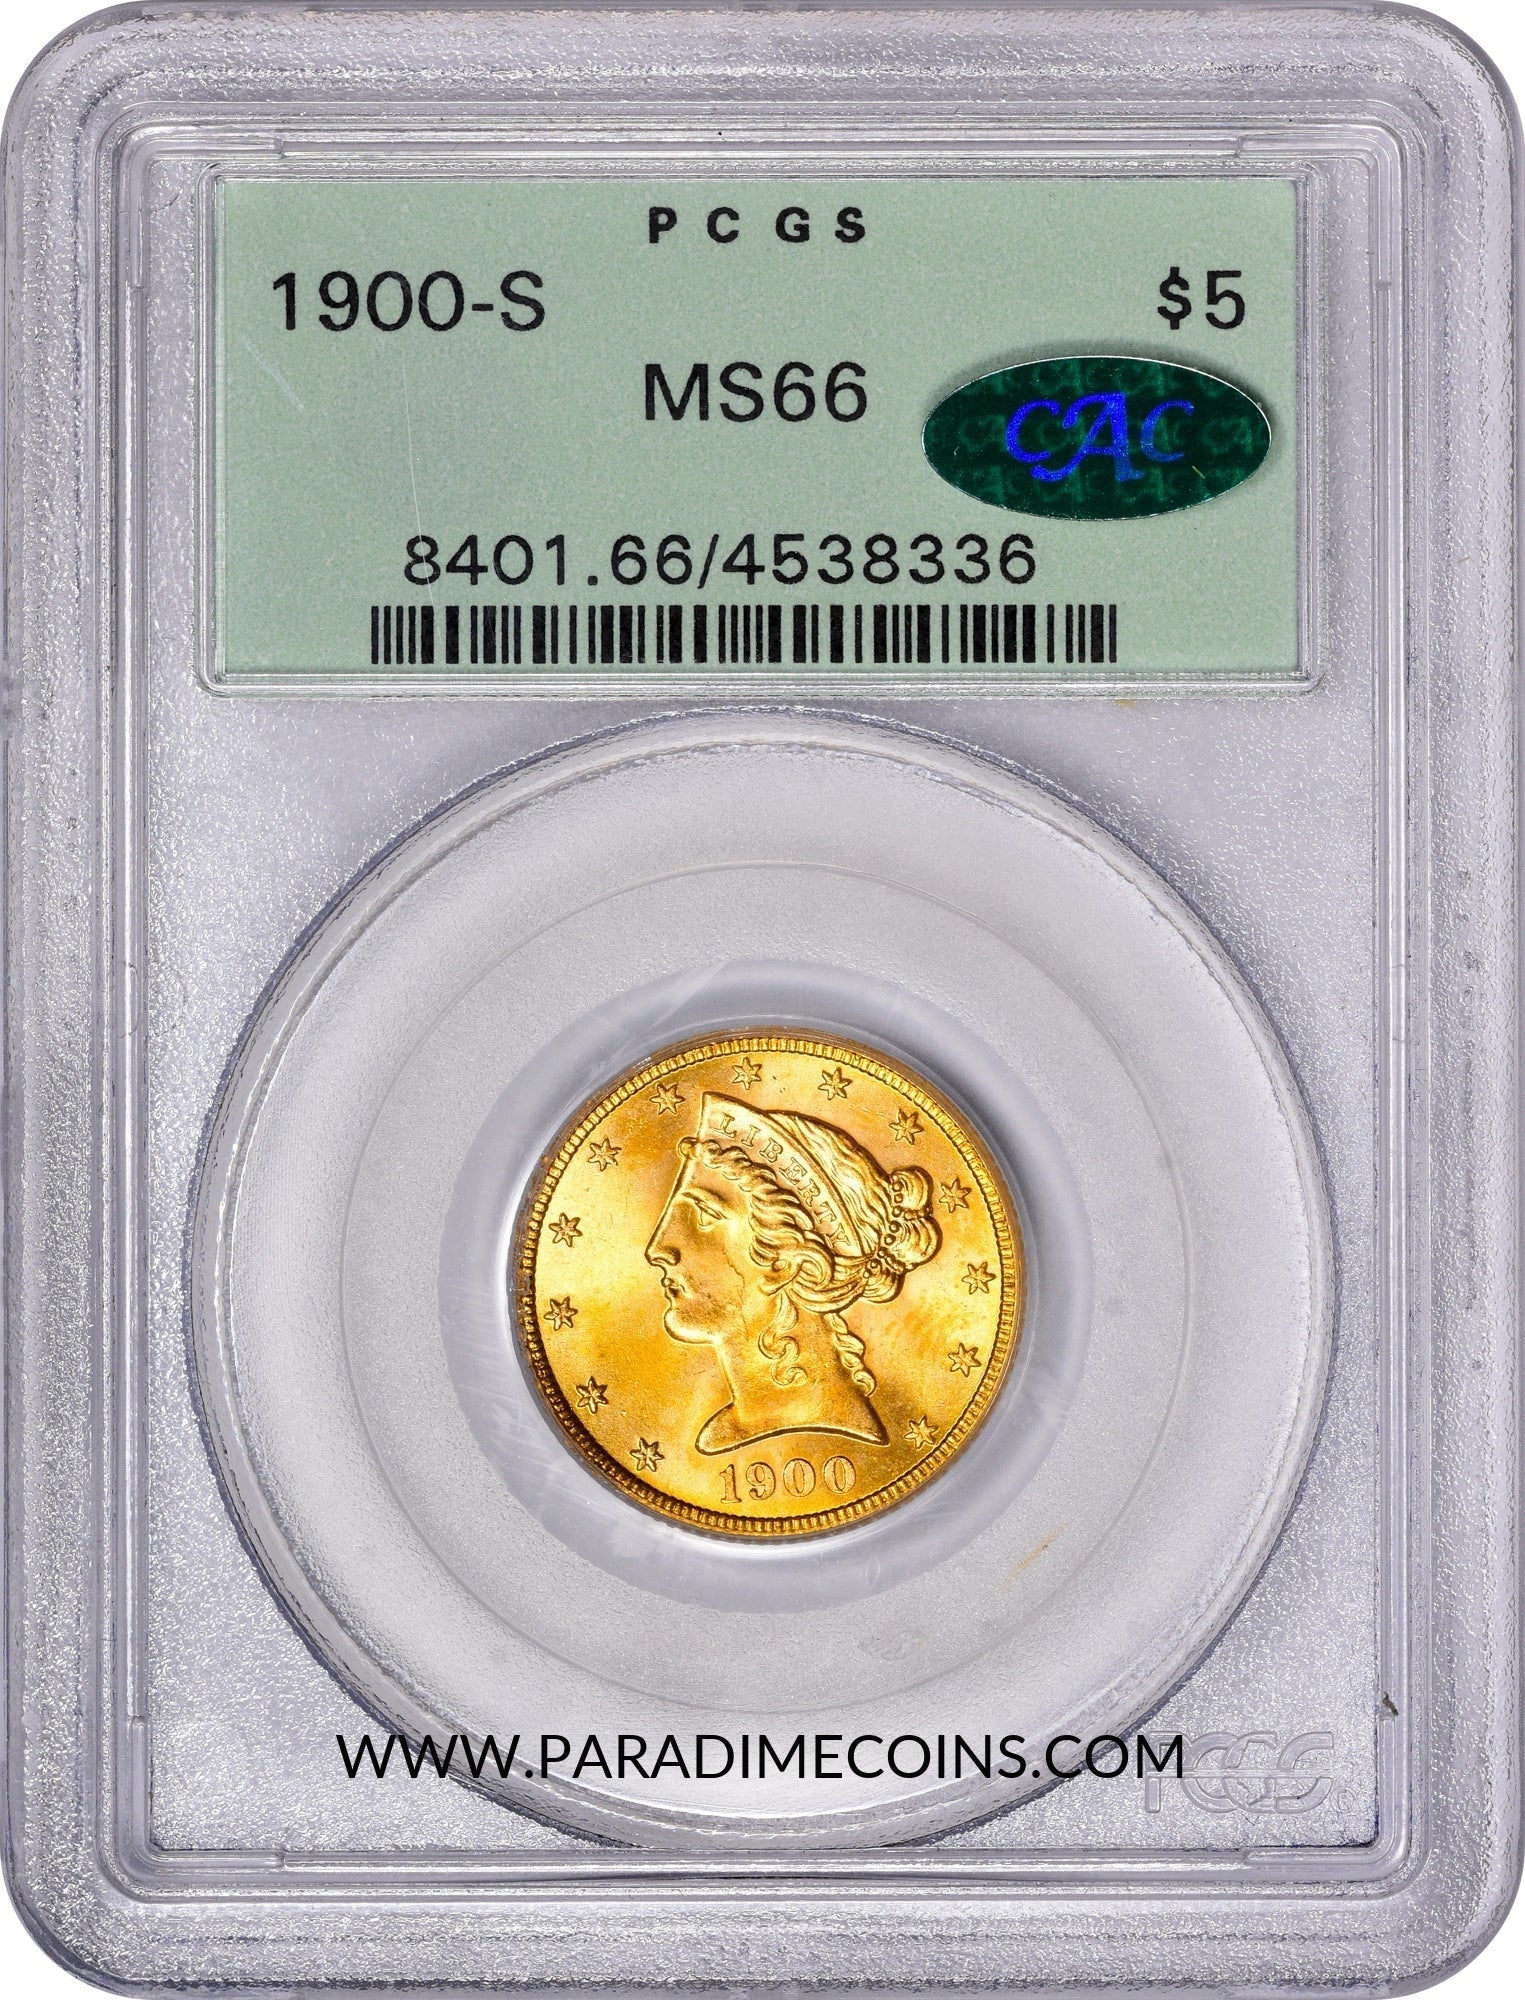 1900-S $5 MS66 OGH PCGS CAC - Paradime Coins | PCGS NGC CACG CAC Rare US Numismatic Coins For Sale